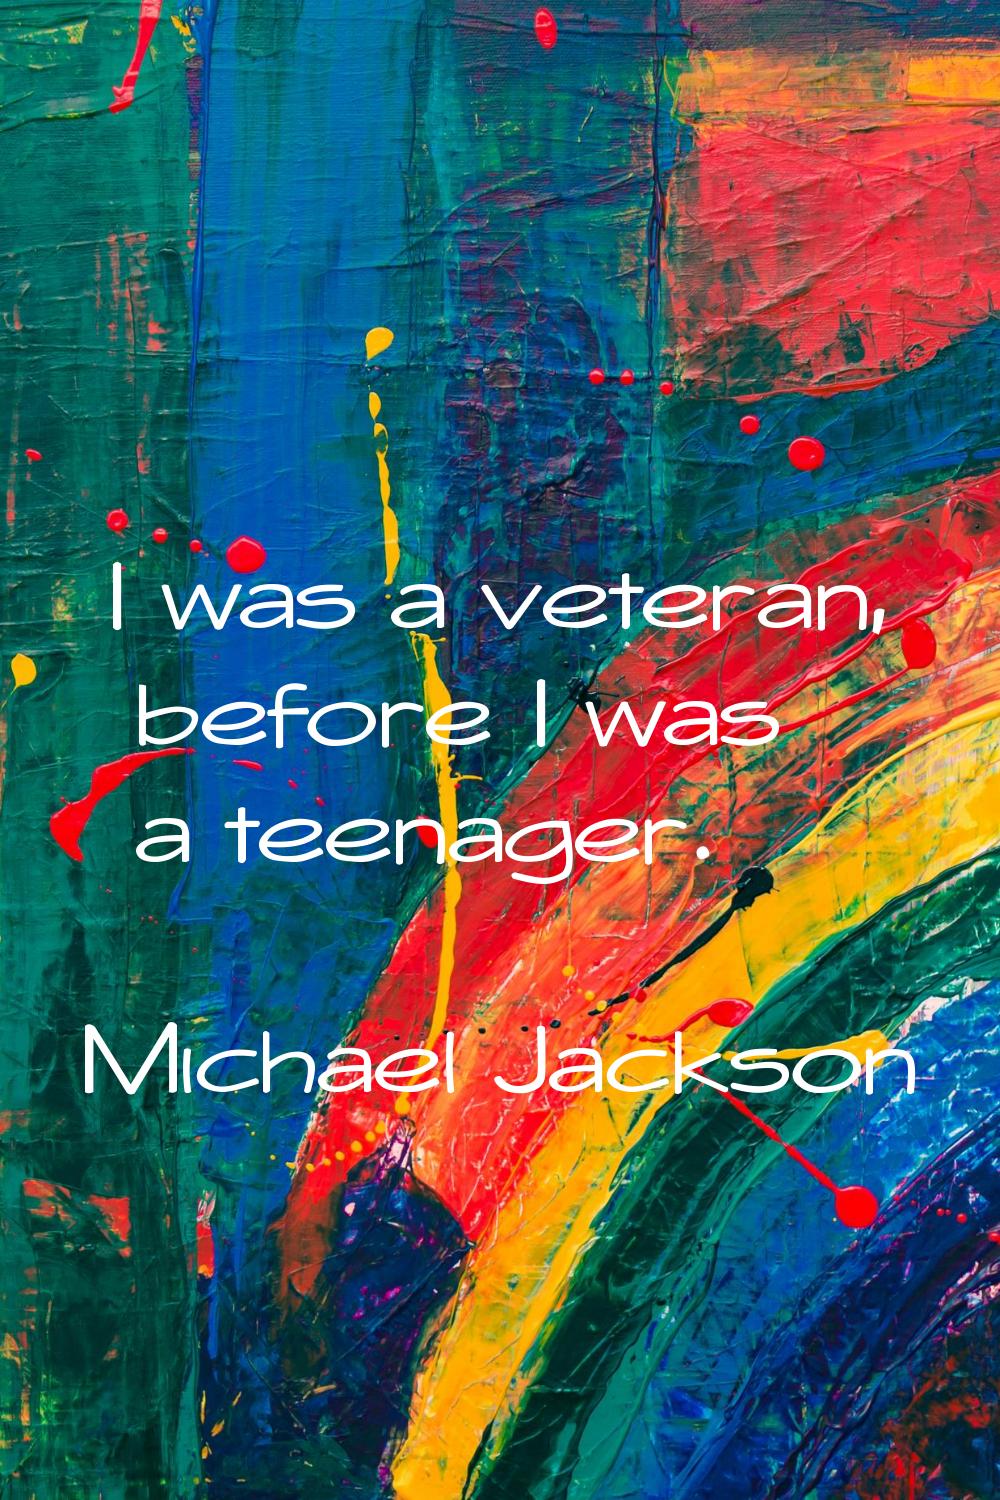 I was a veteran, before I was a teenager.